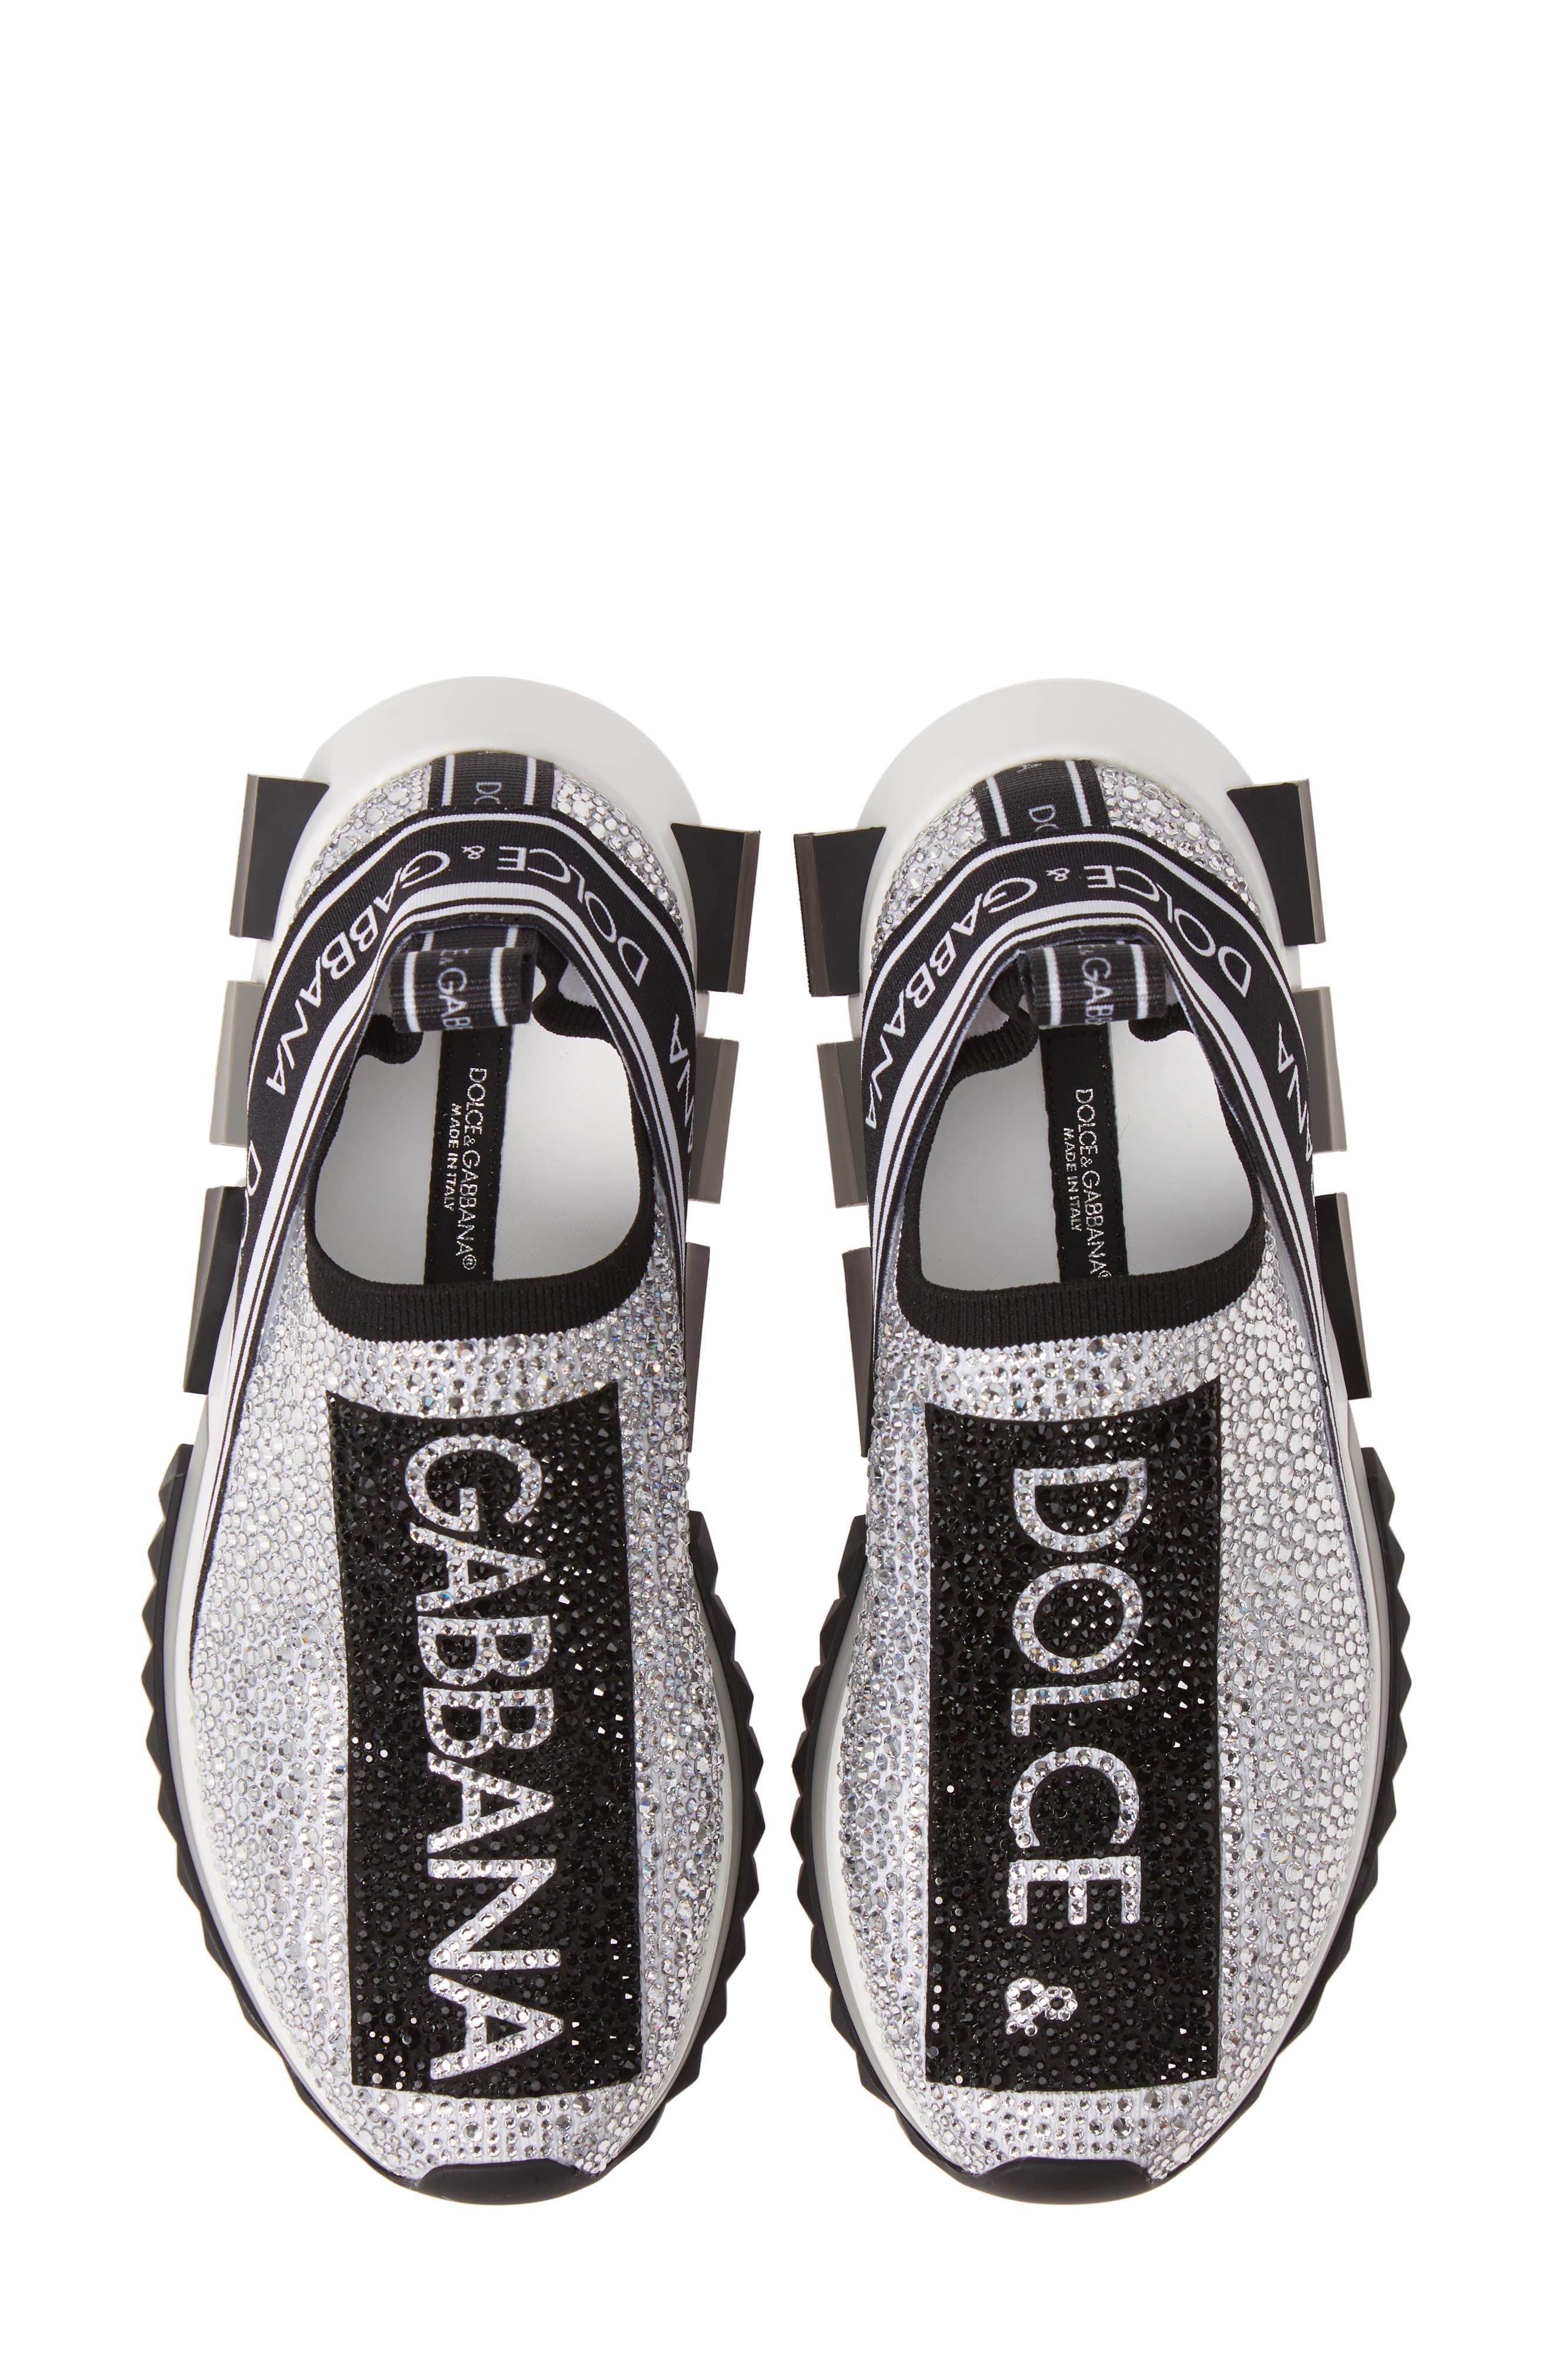 dolce gabbana shoes with diamond